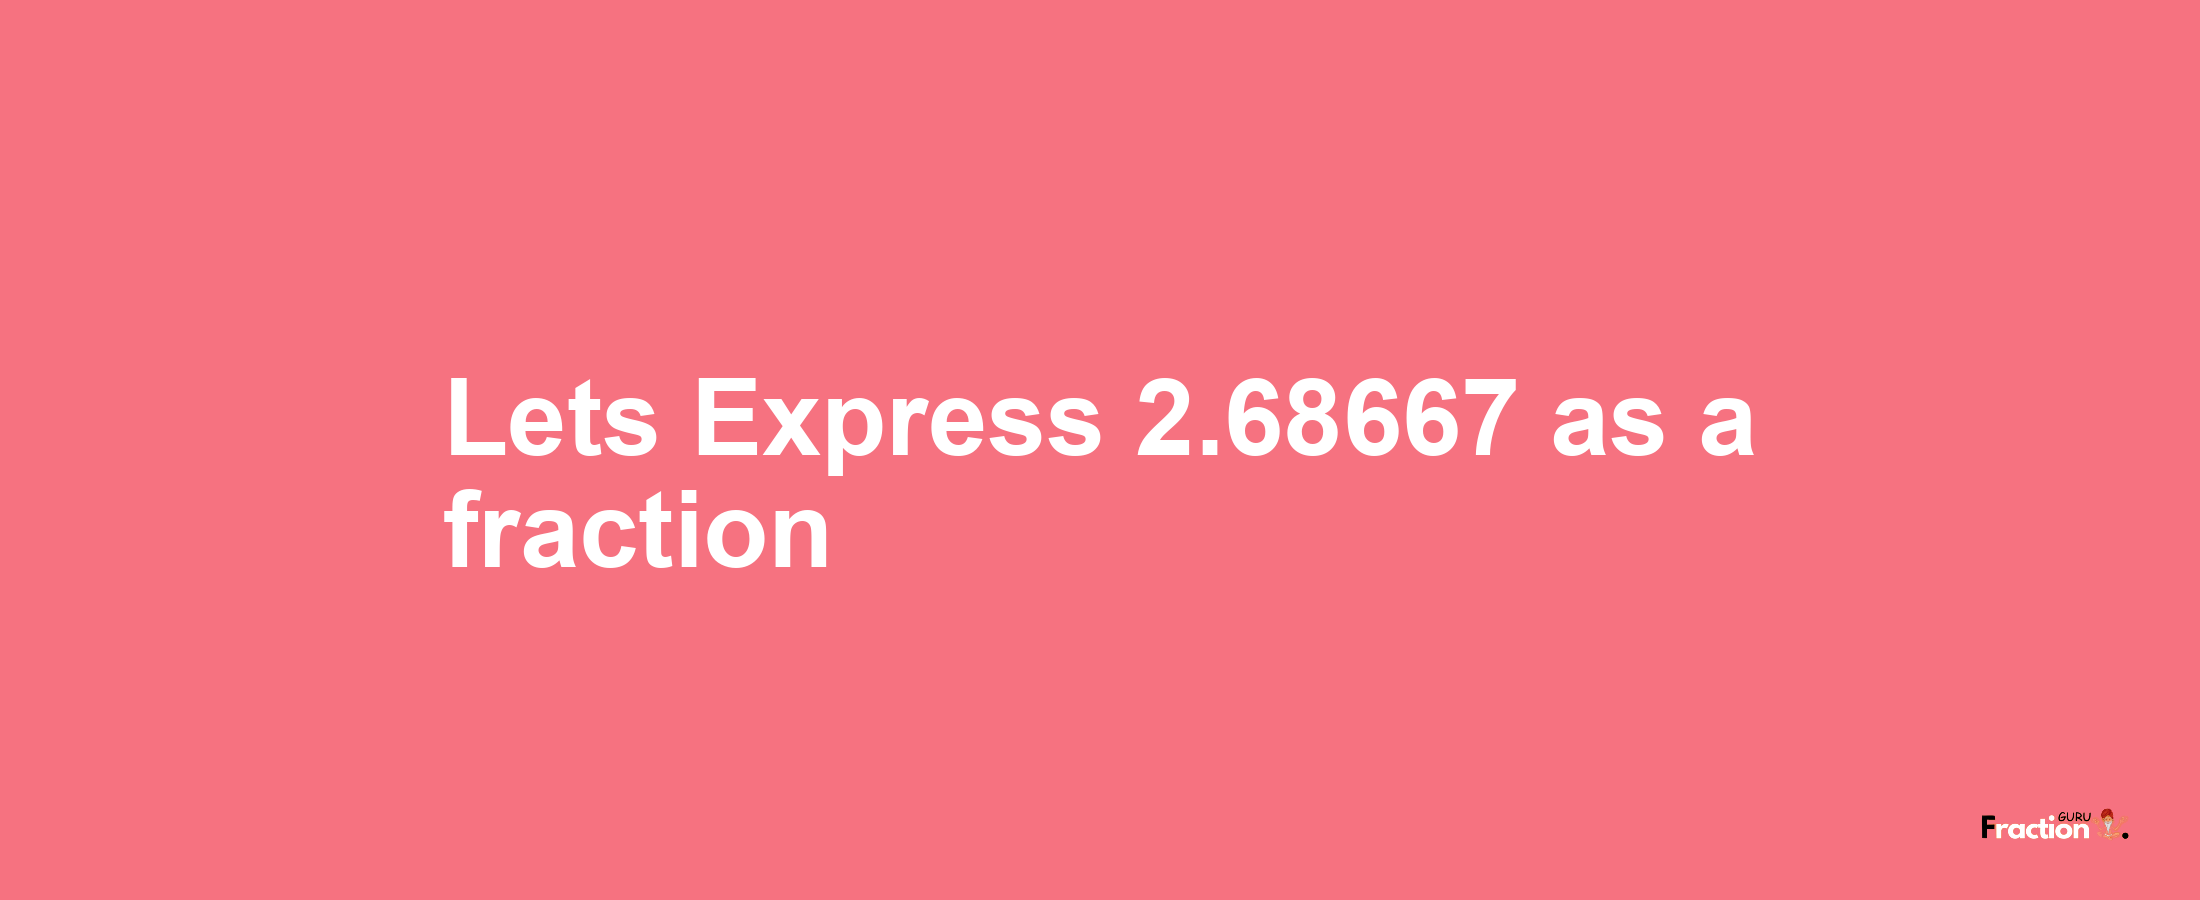 Lets Express 2.68667 as afraction